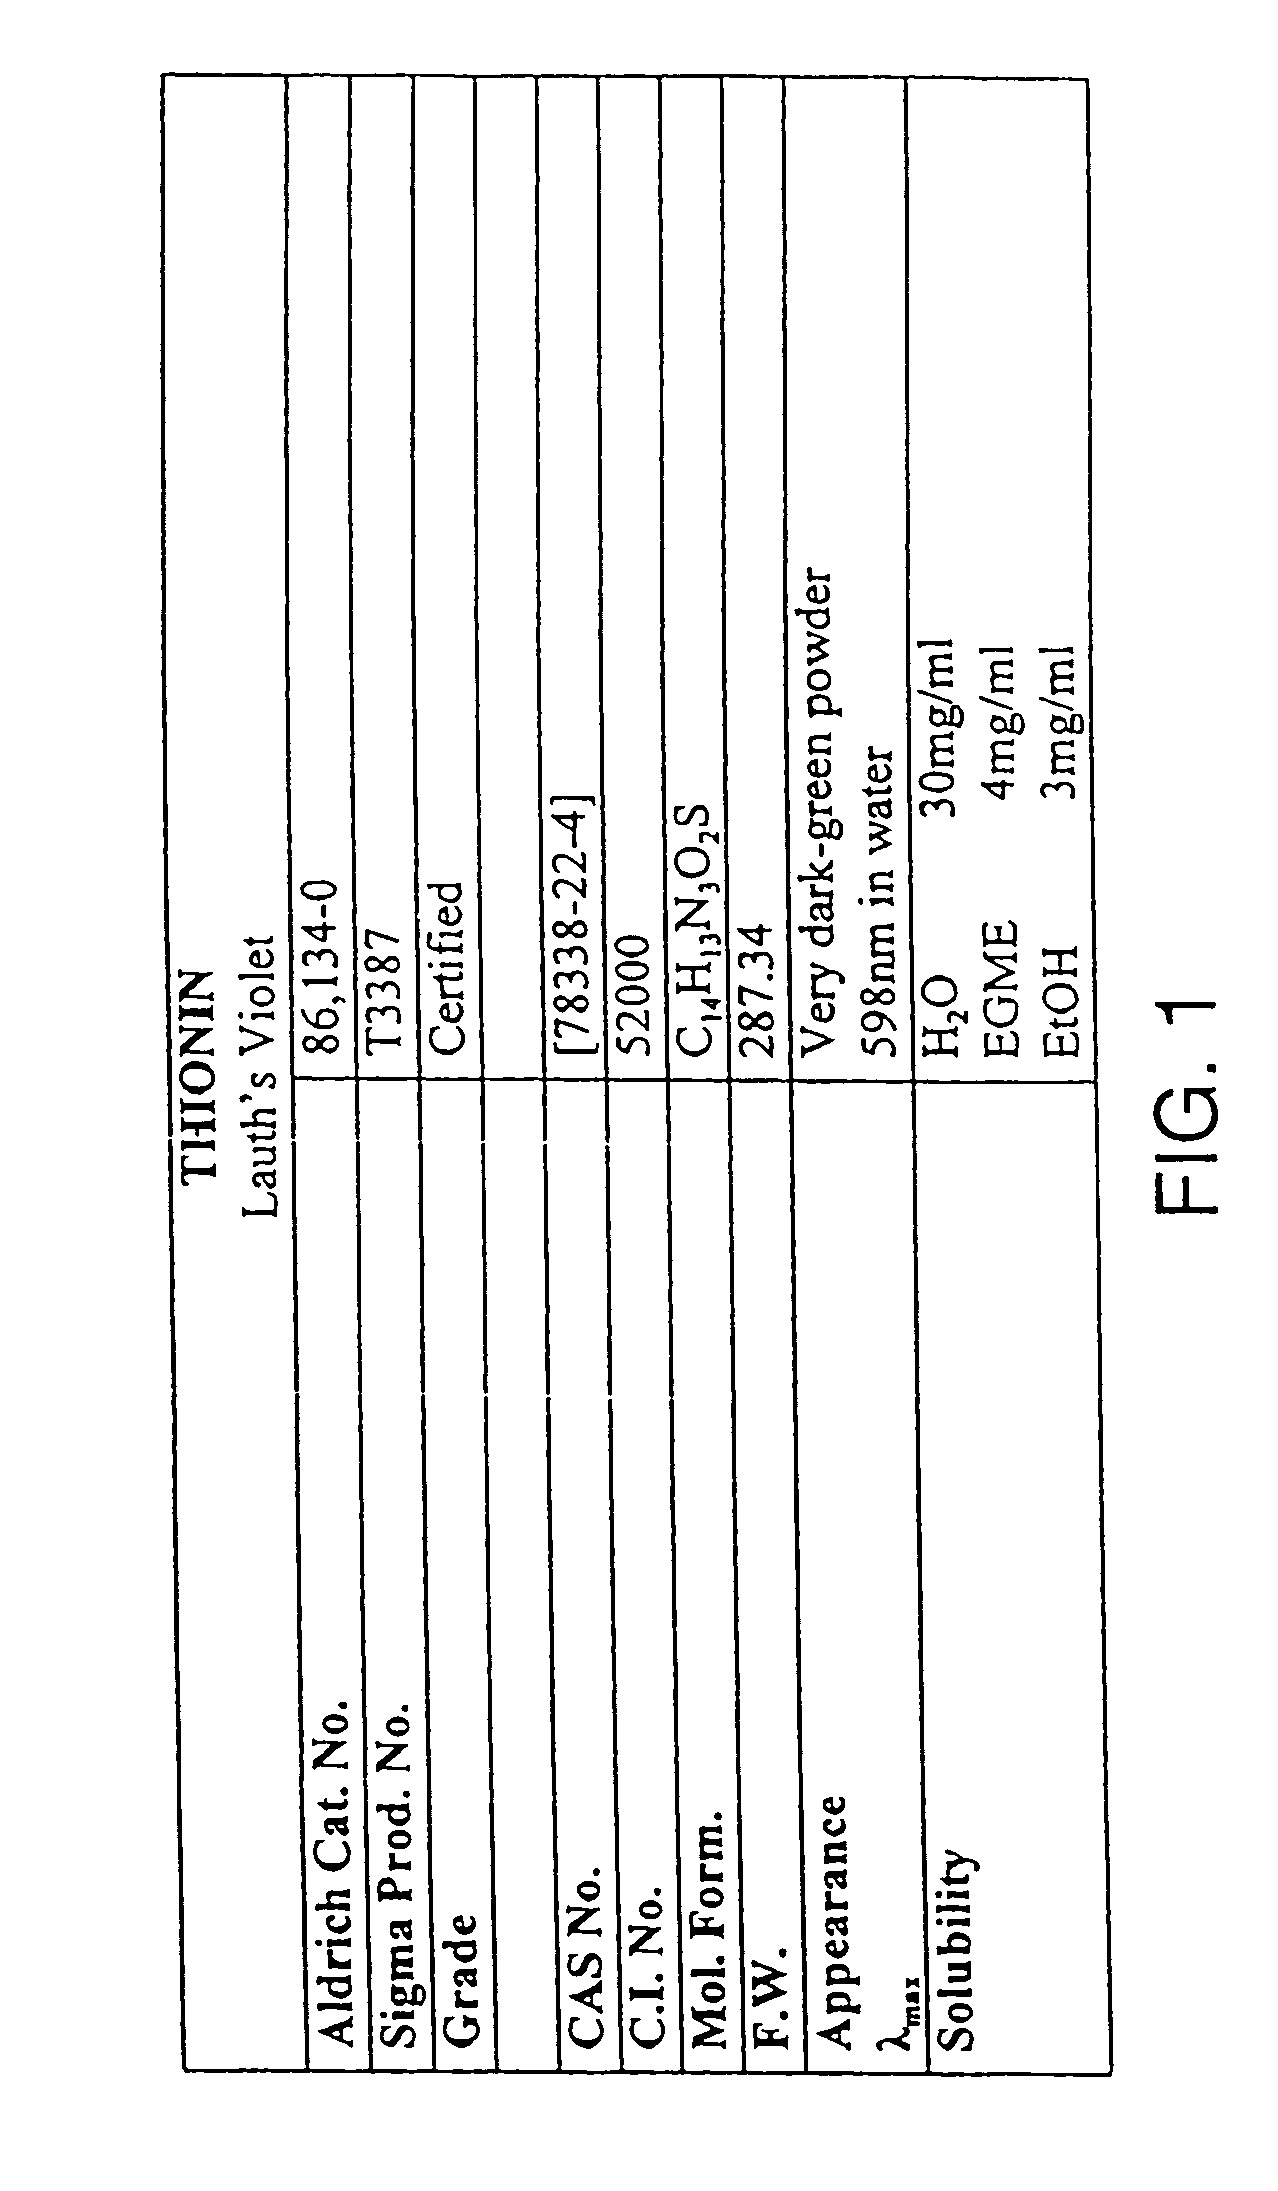 Cytological imaging system and method